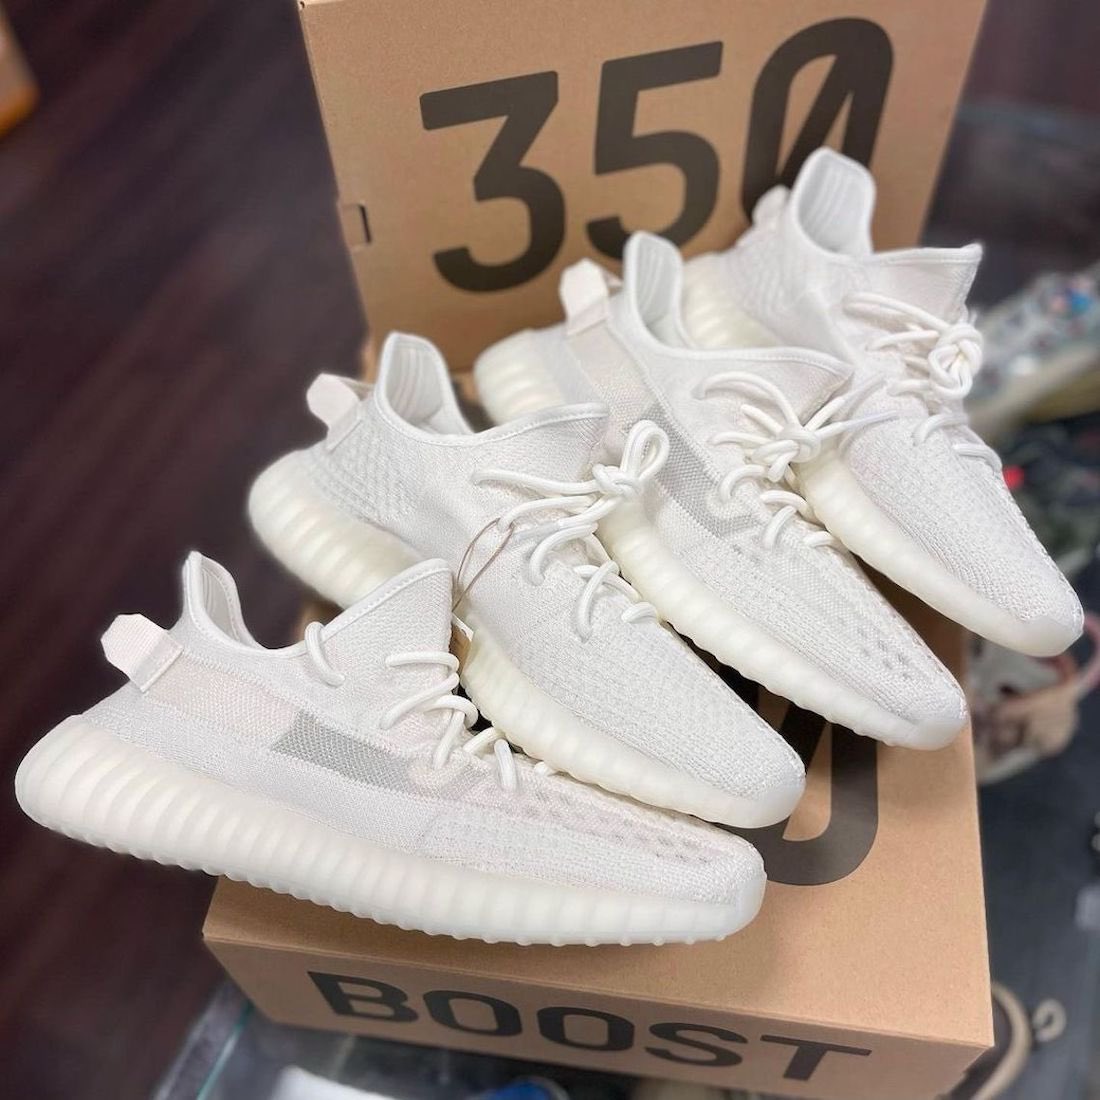 Nice Kicks on Twitter: "Check out “Pure Oat” Yeezy Boost 350 ☁️ https://t.co/JpmzumOqI9" / Twitter